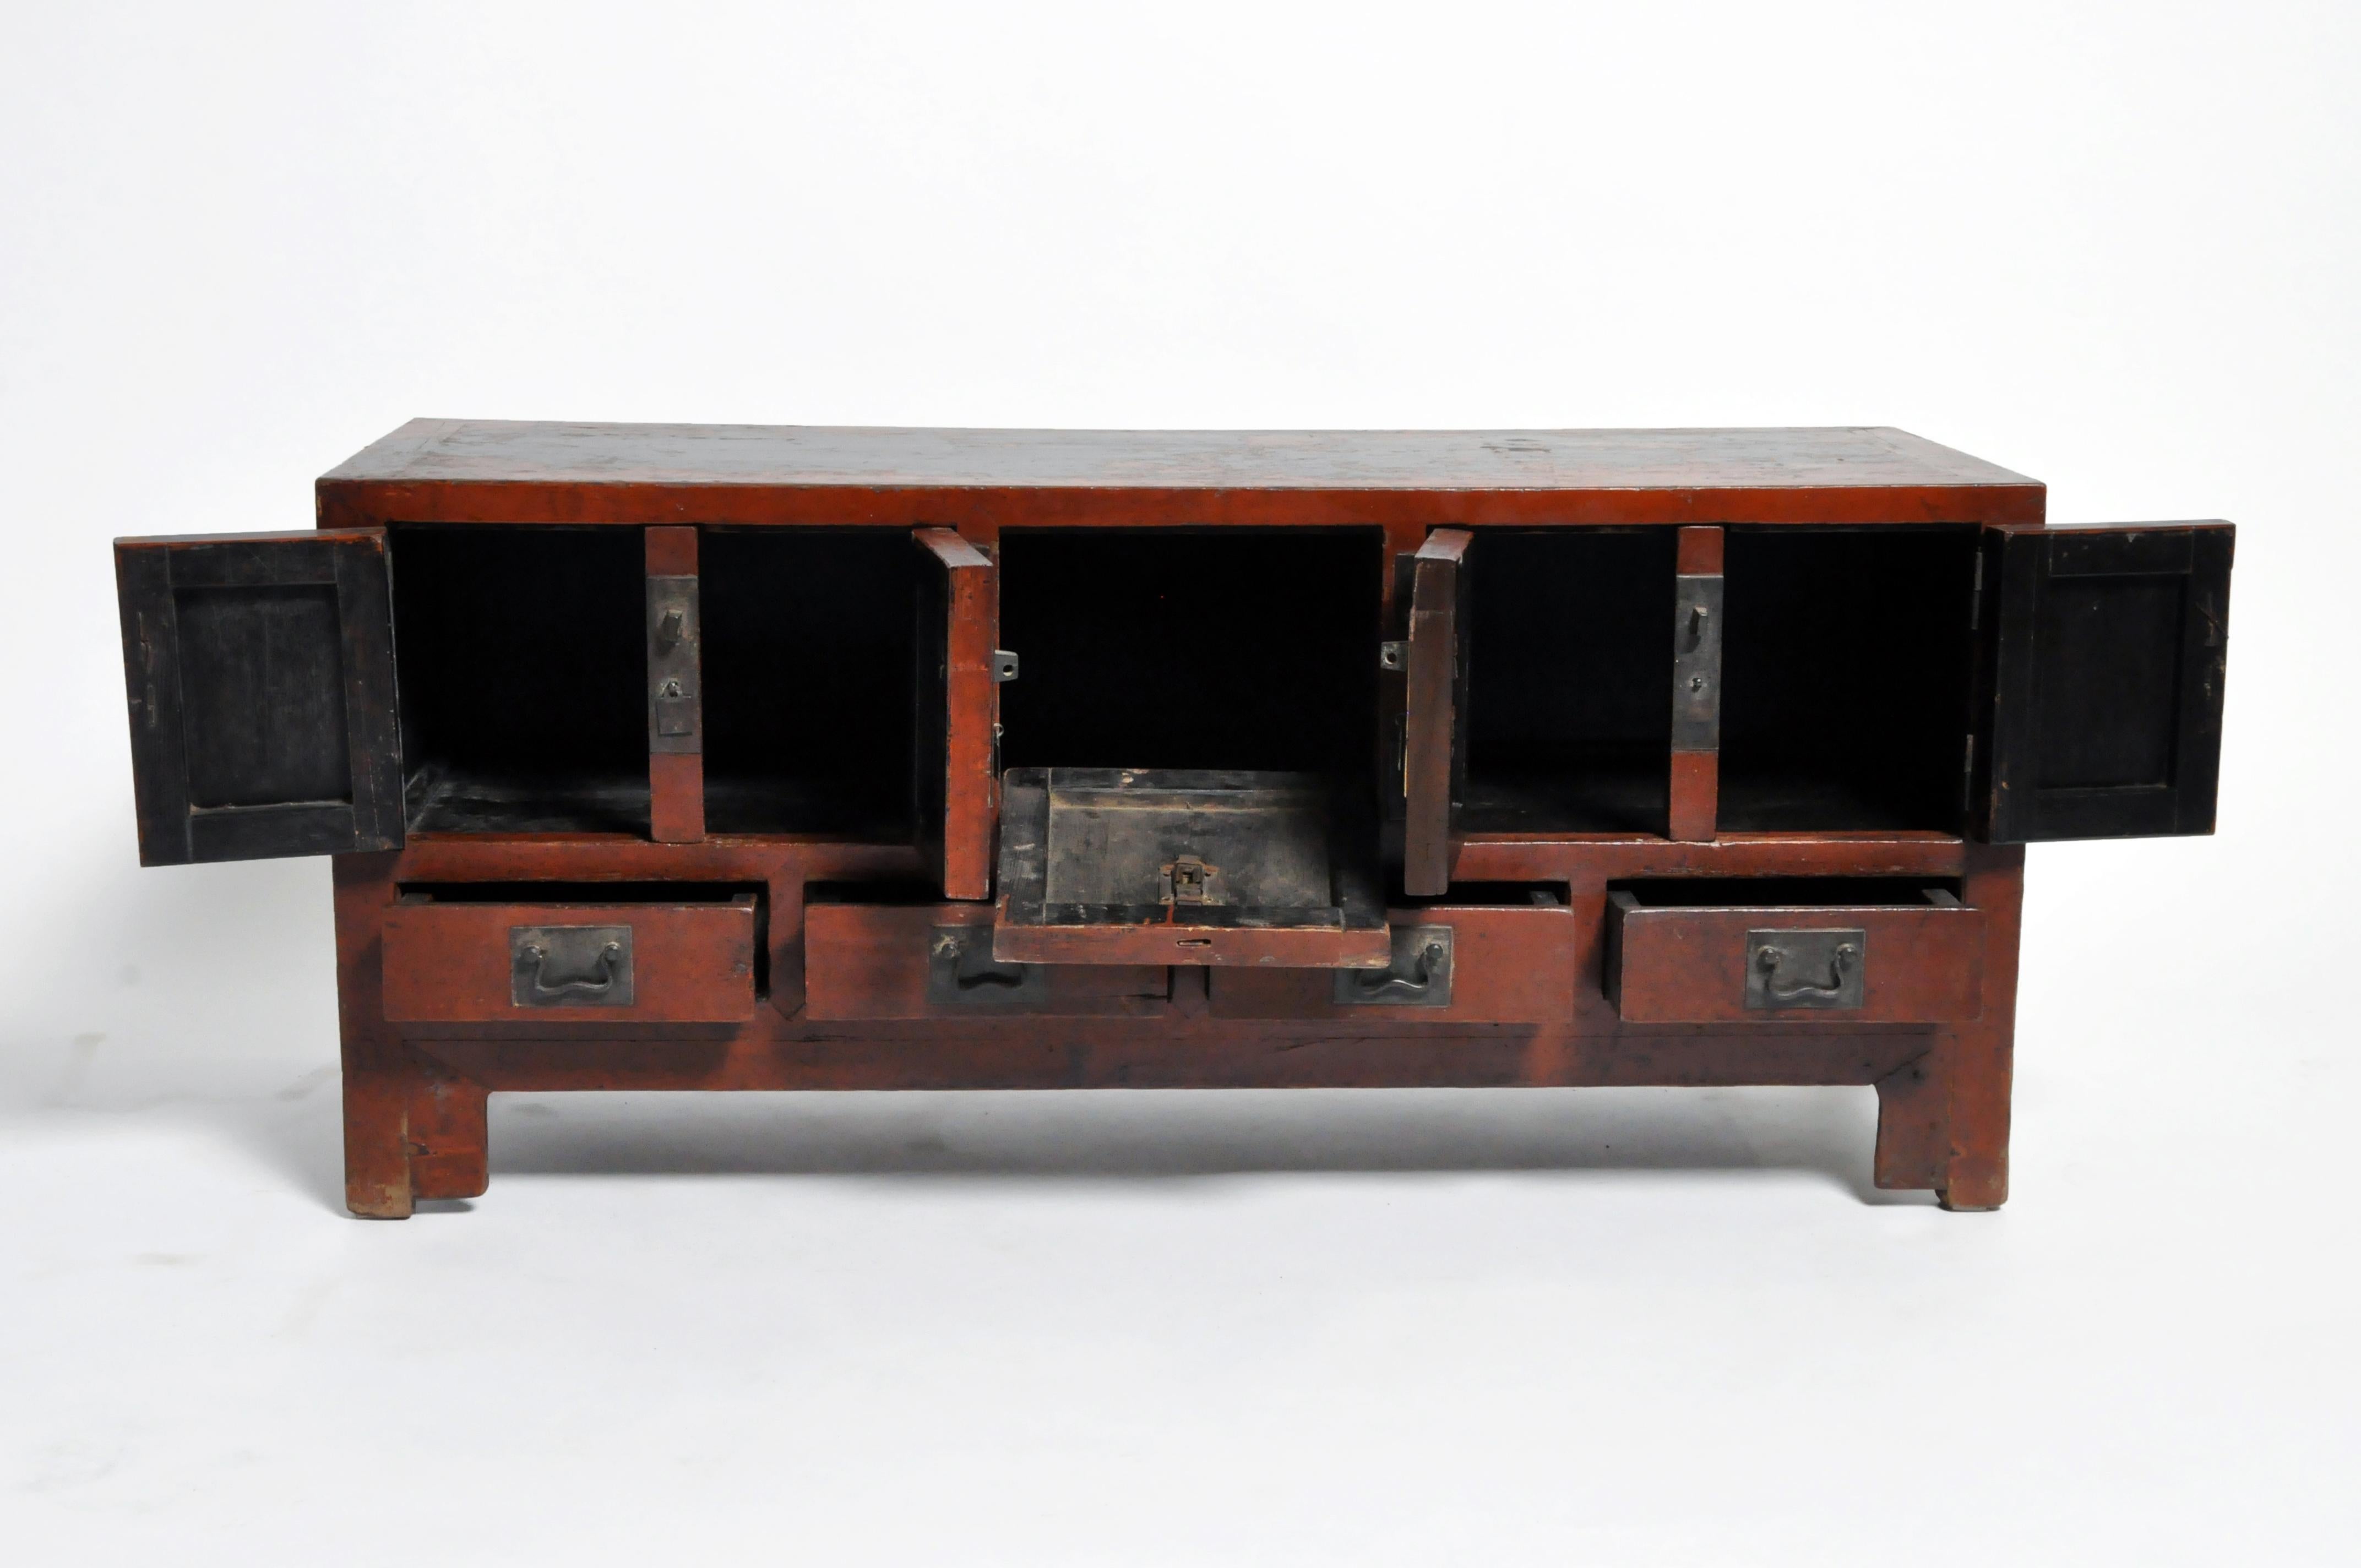 Late Qing Dynasty Tianjin Chest (Qing-Dynastie)